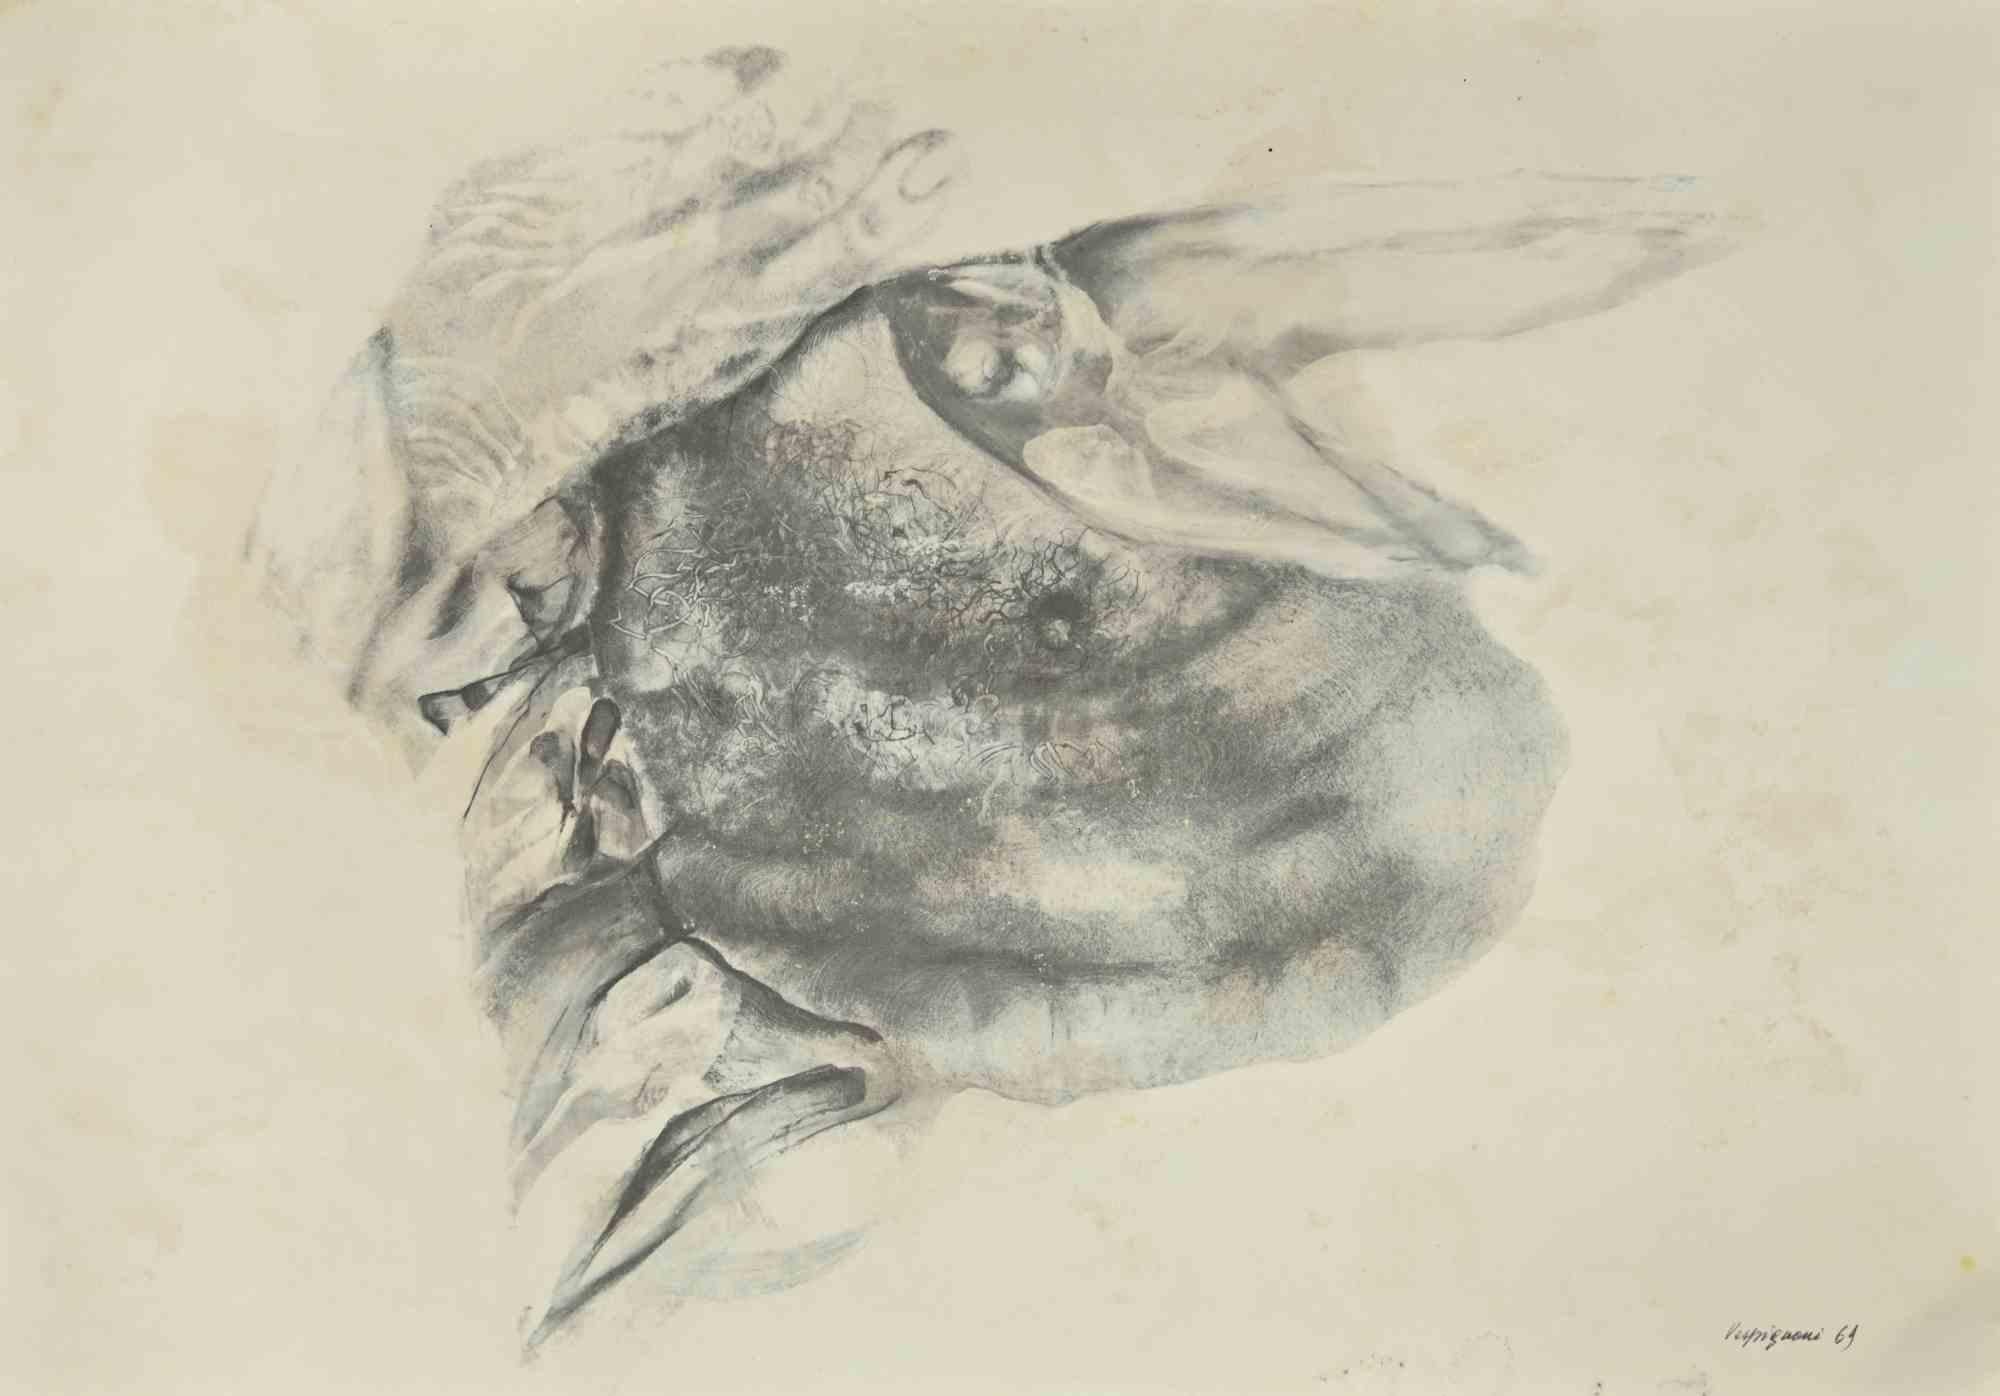 The Hand is a phototype print reproducing drawing by Renzo Vespignani of the 1960s

Signed on the plate lower right.

The artwork is depicted through strong strokes and perfect hatchings.